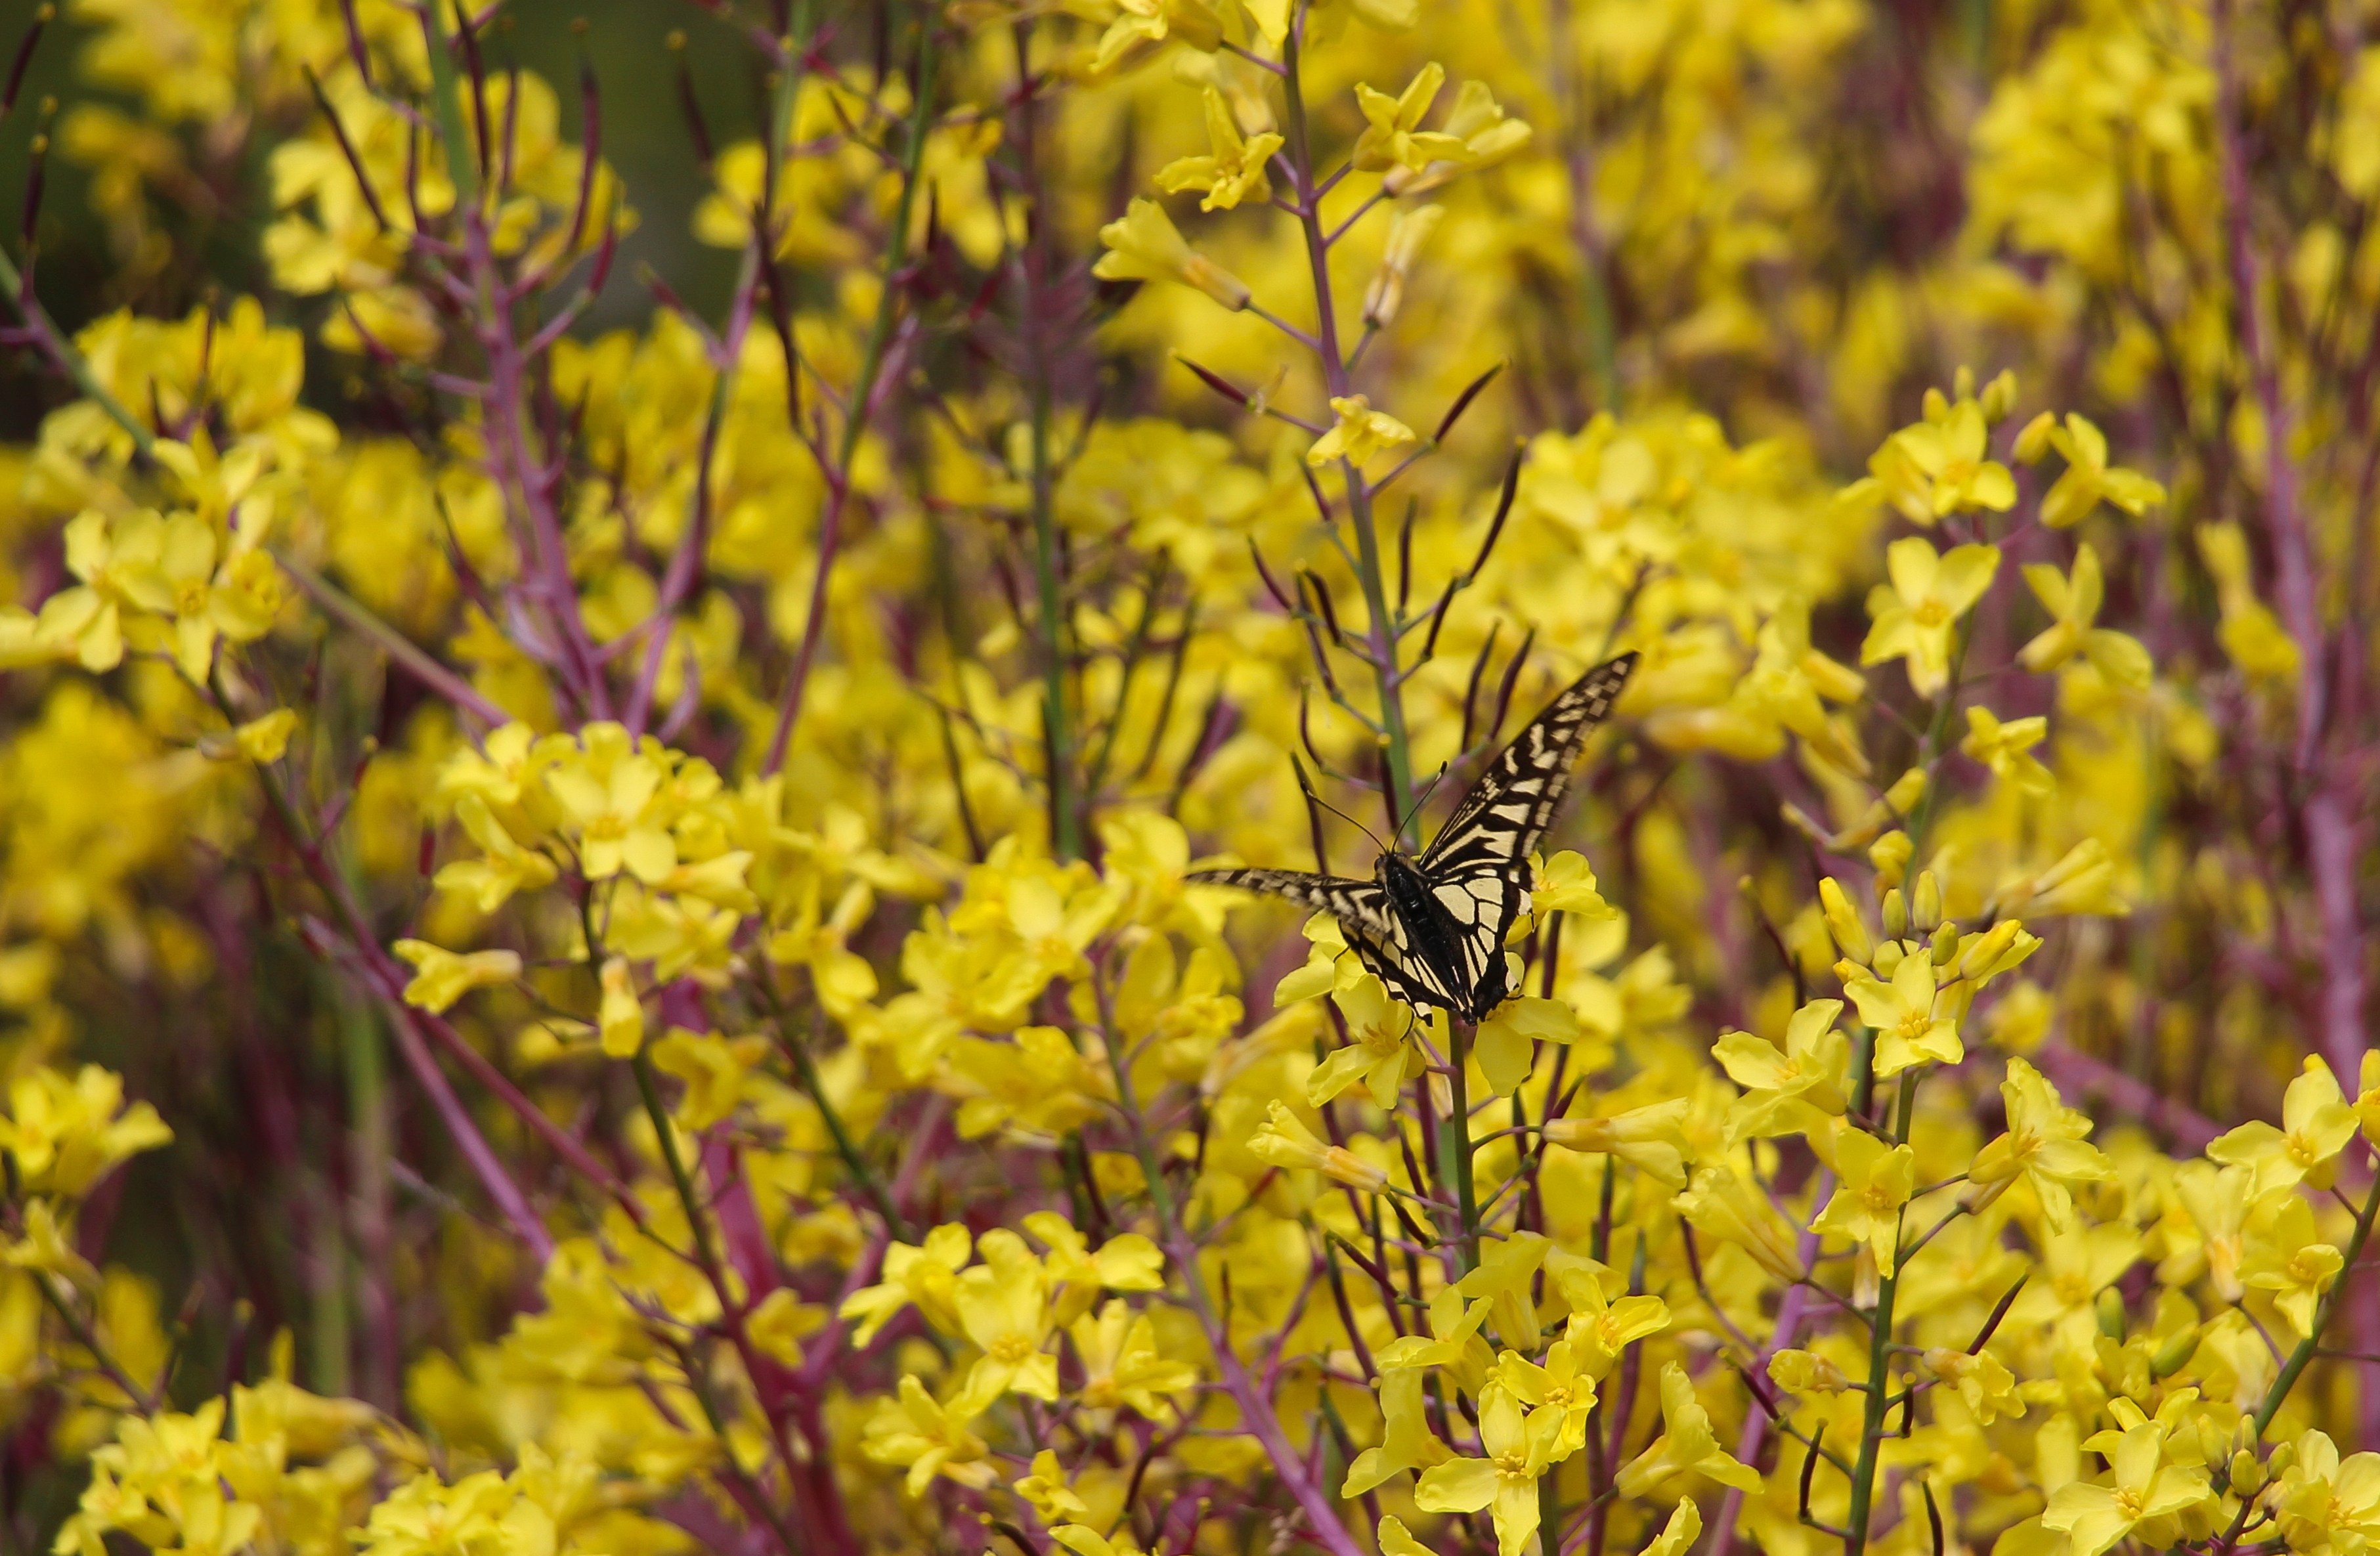 General 3625x2370 Forsythia yellow flowers insect animals plants colorful closeup macro butterfly flowers